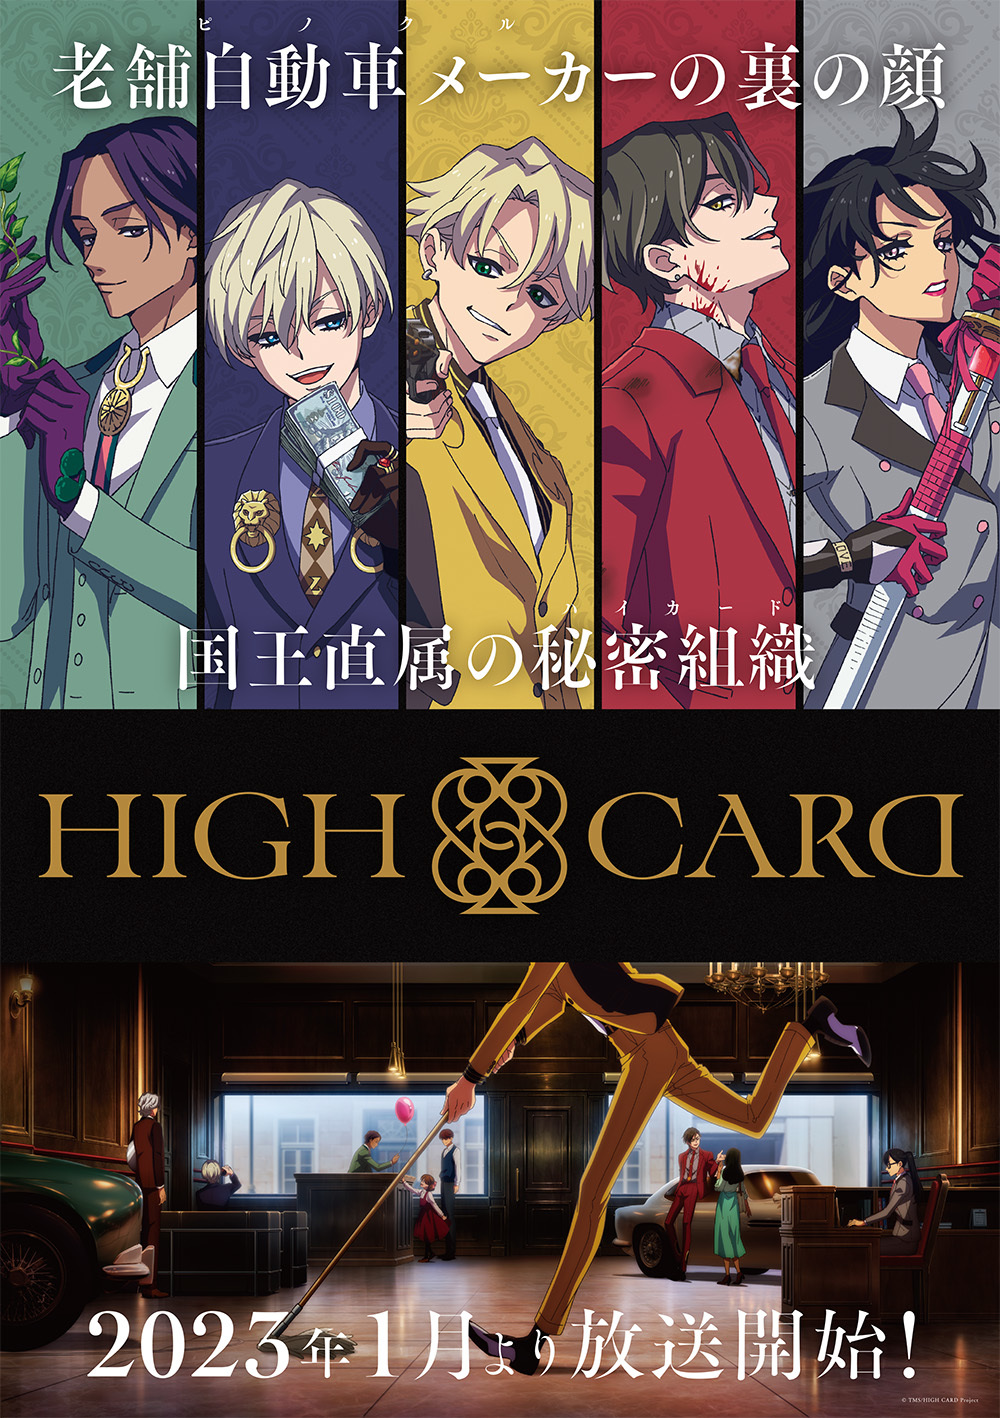 TVアニメ『HIGH CARD』 (C) TMS/HIGH CARD Project